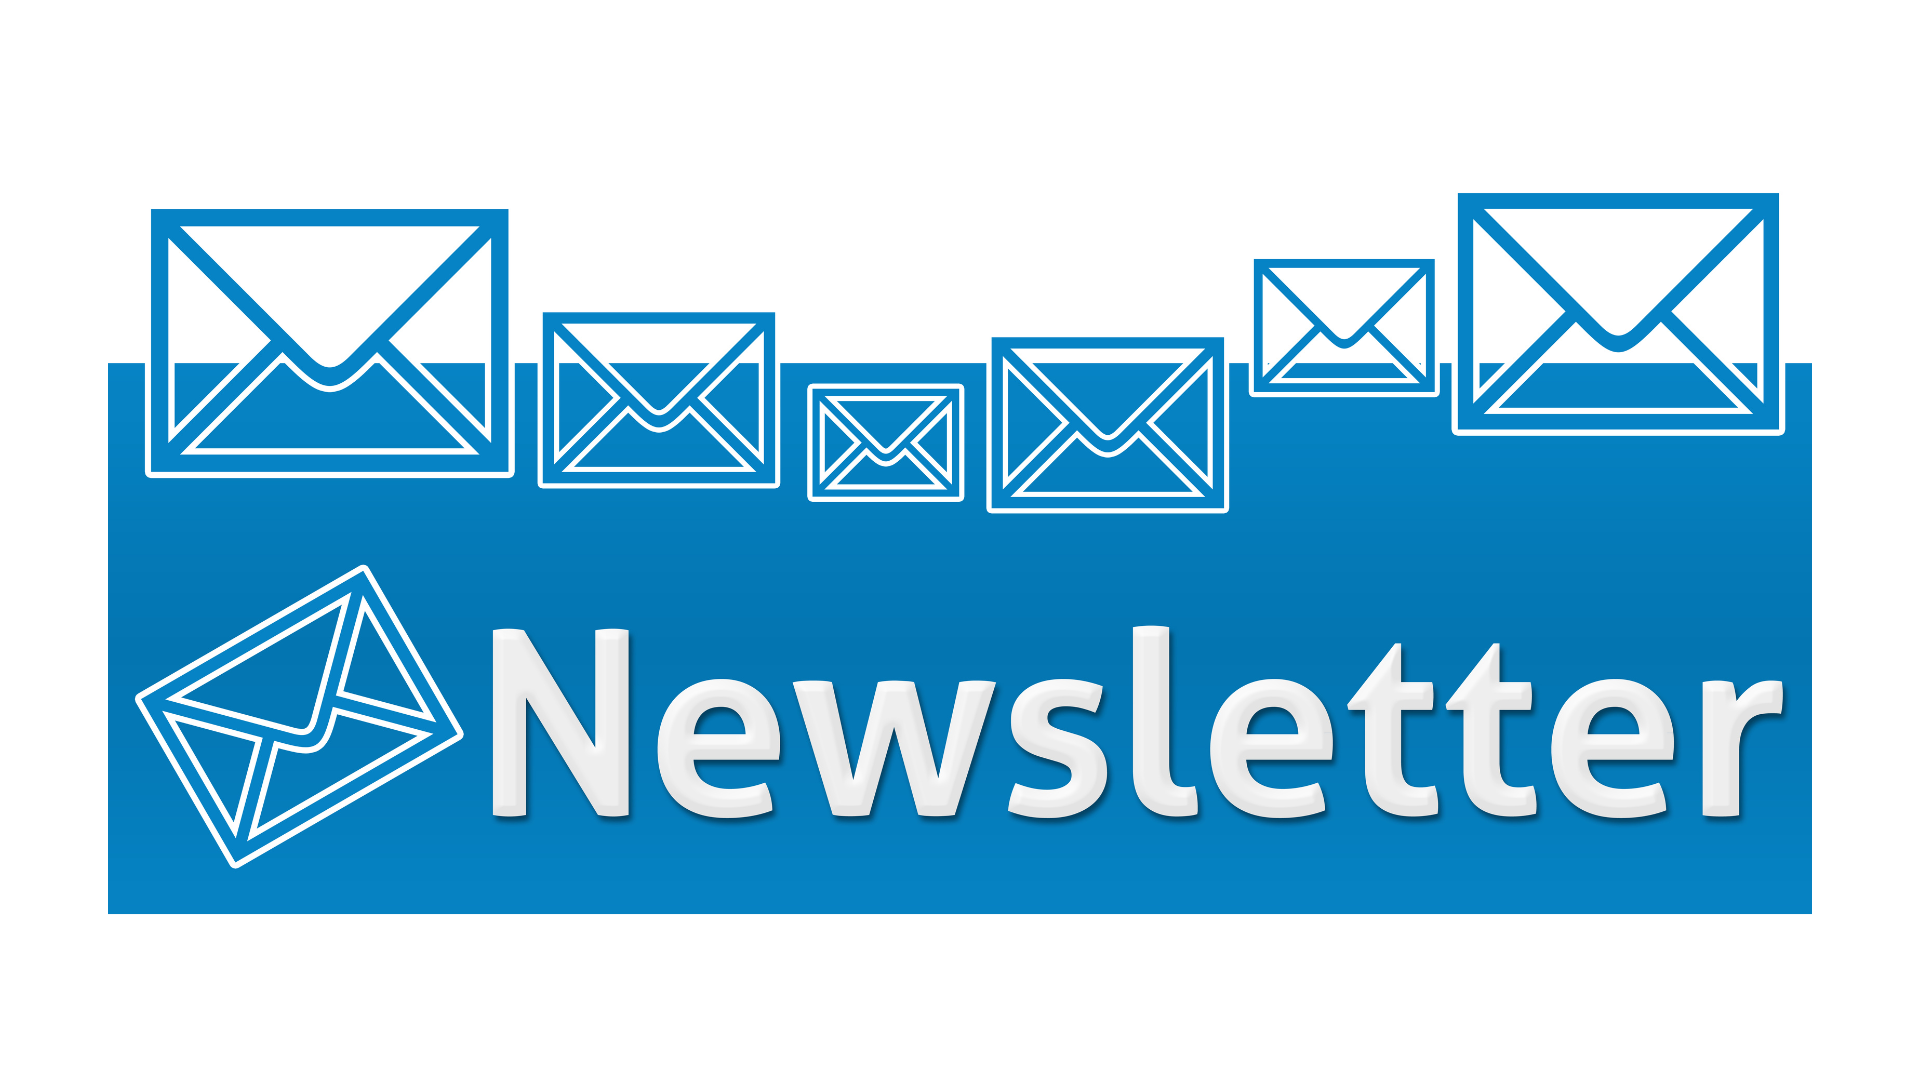 Graphic with the word "newsletter" surrounded by envelopes